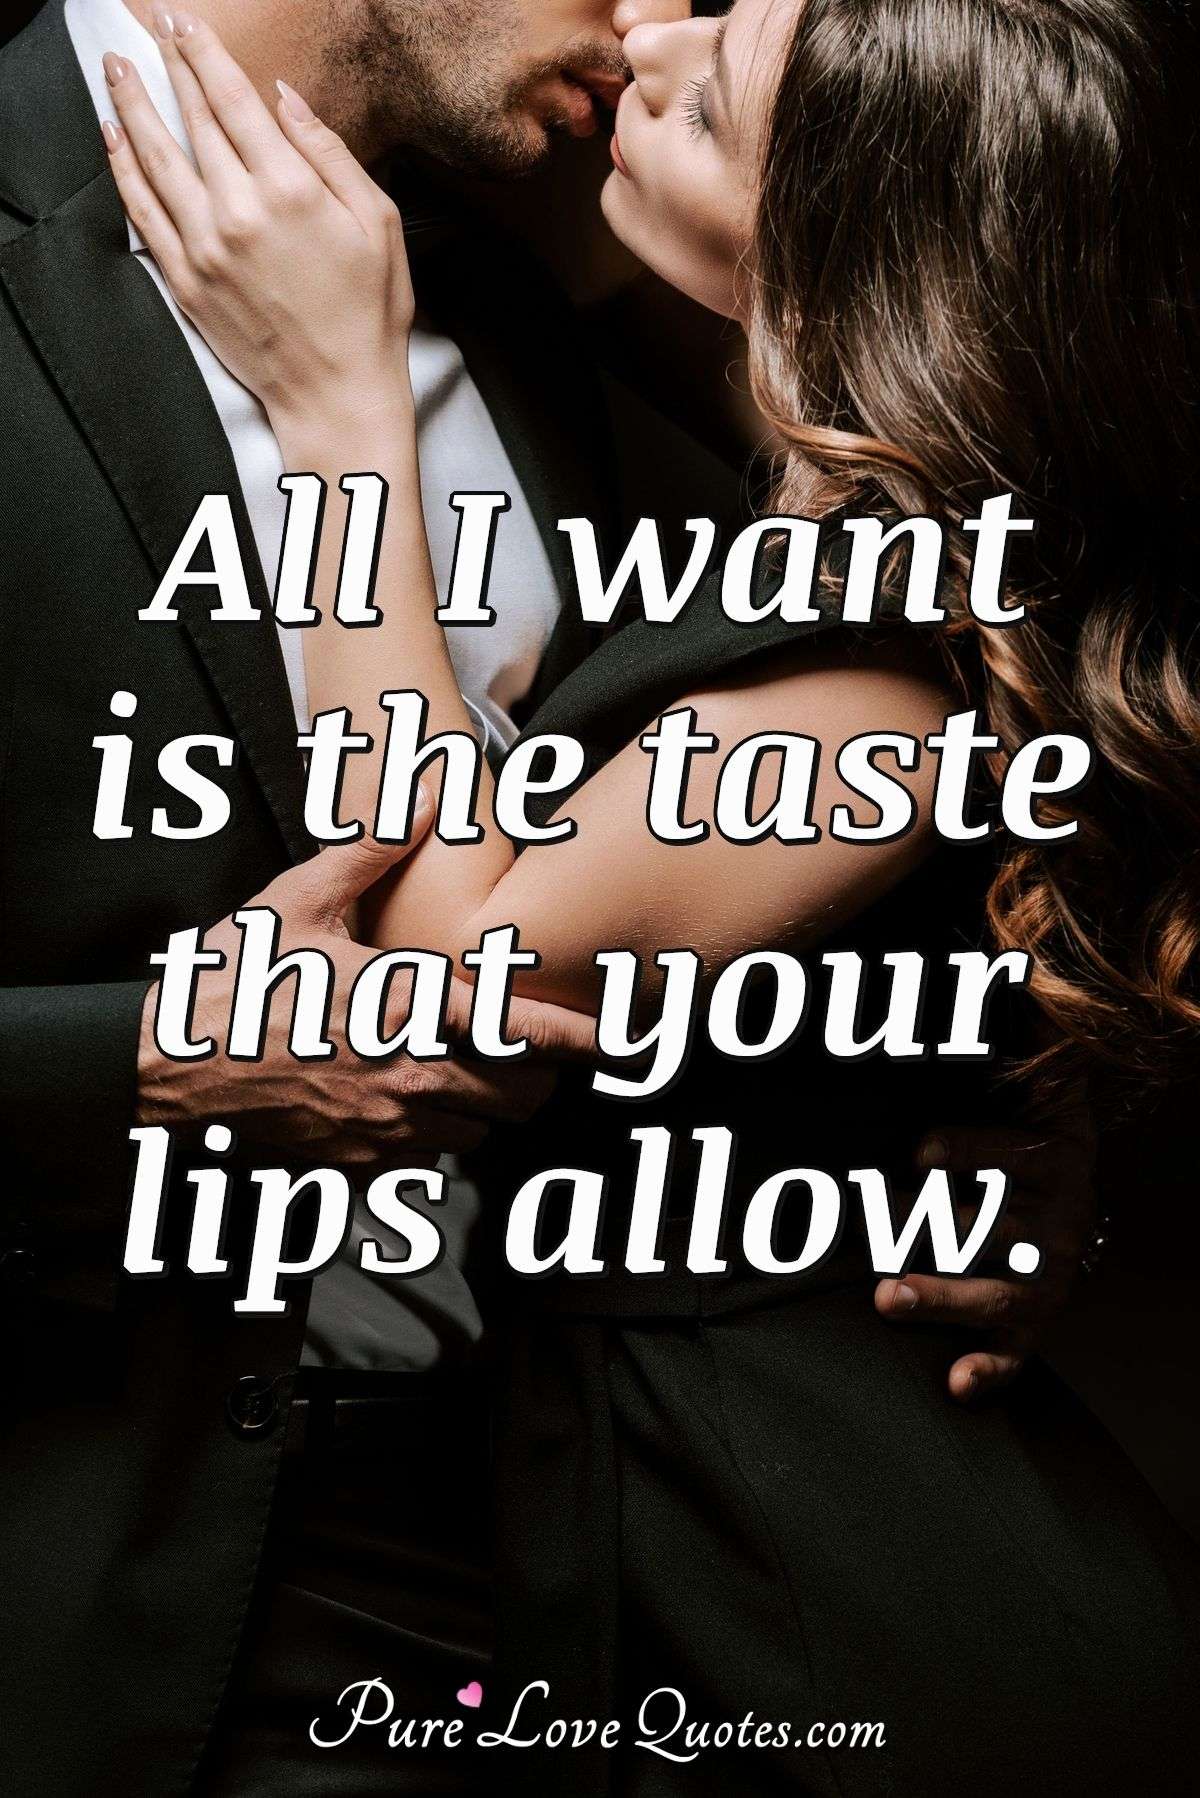 All I want is the taste that your lips allow. - Anonymous